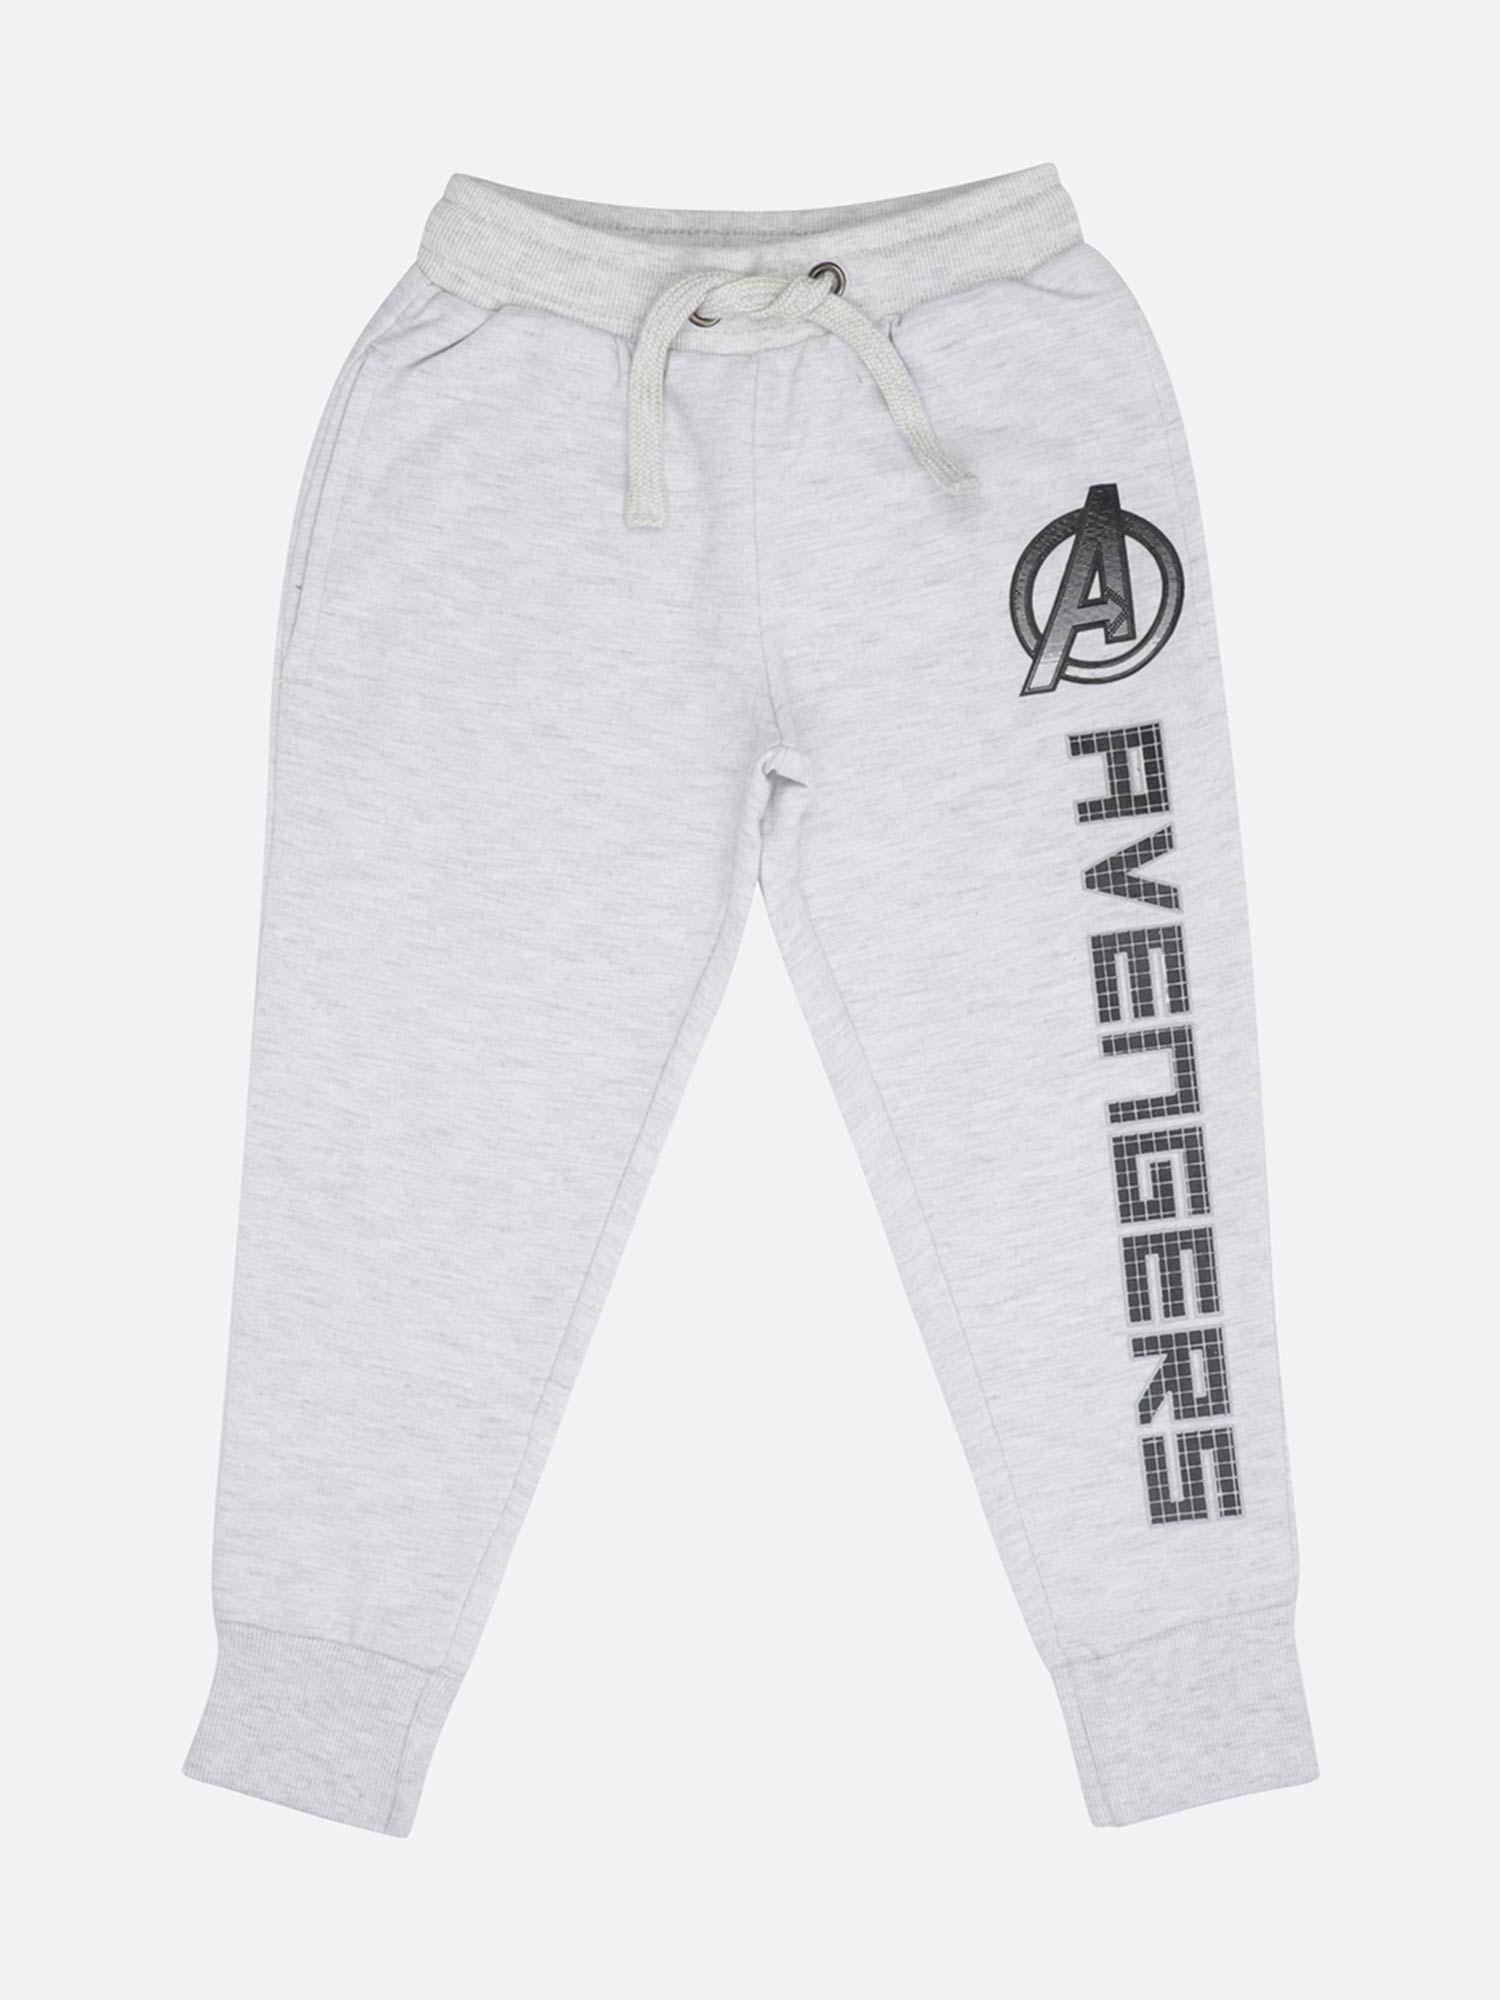 avengers featured jogger for boys